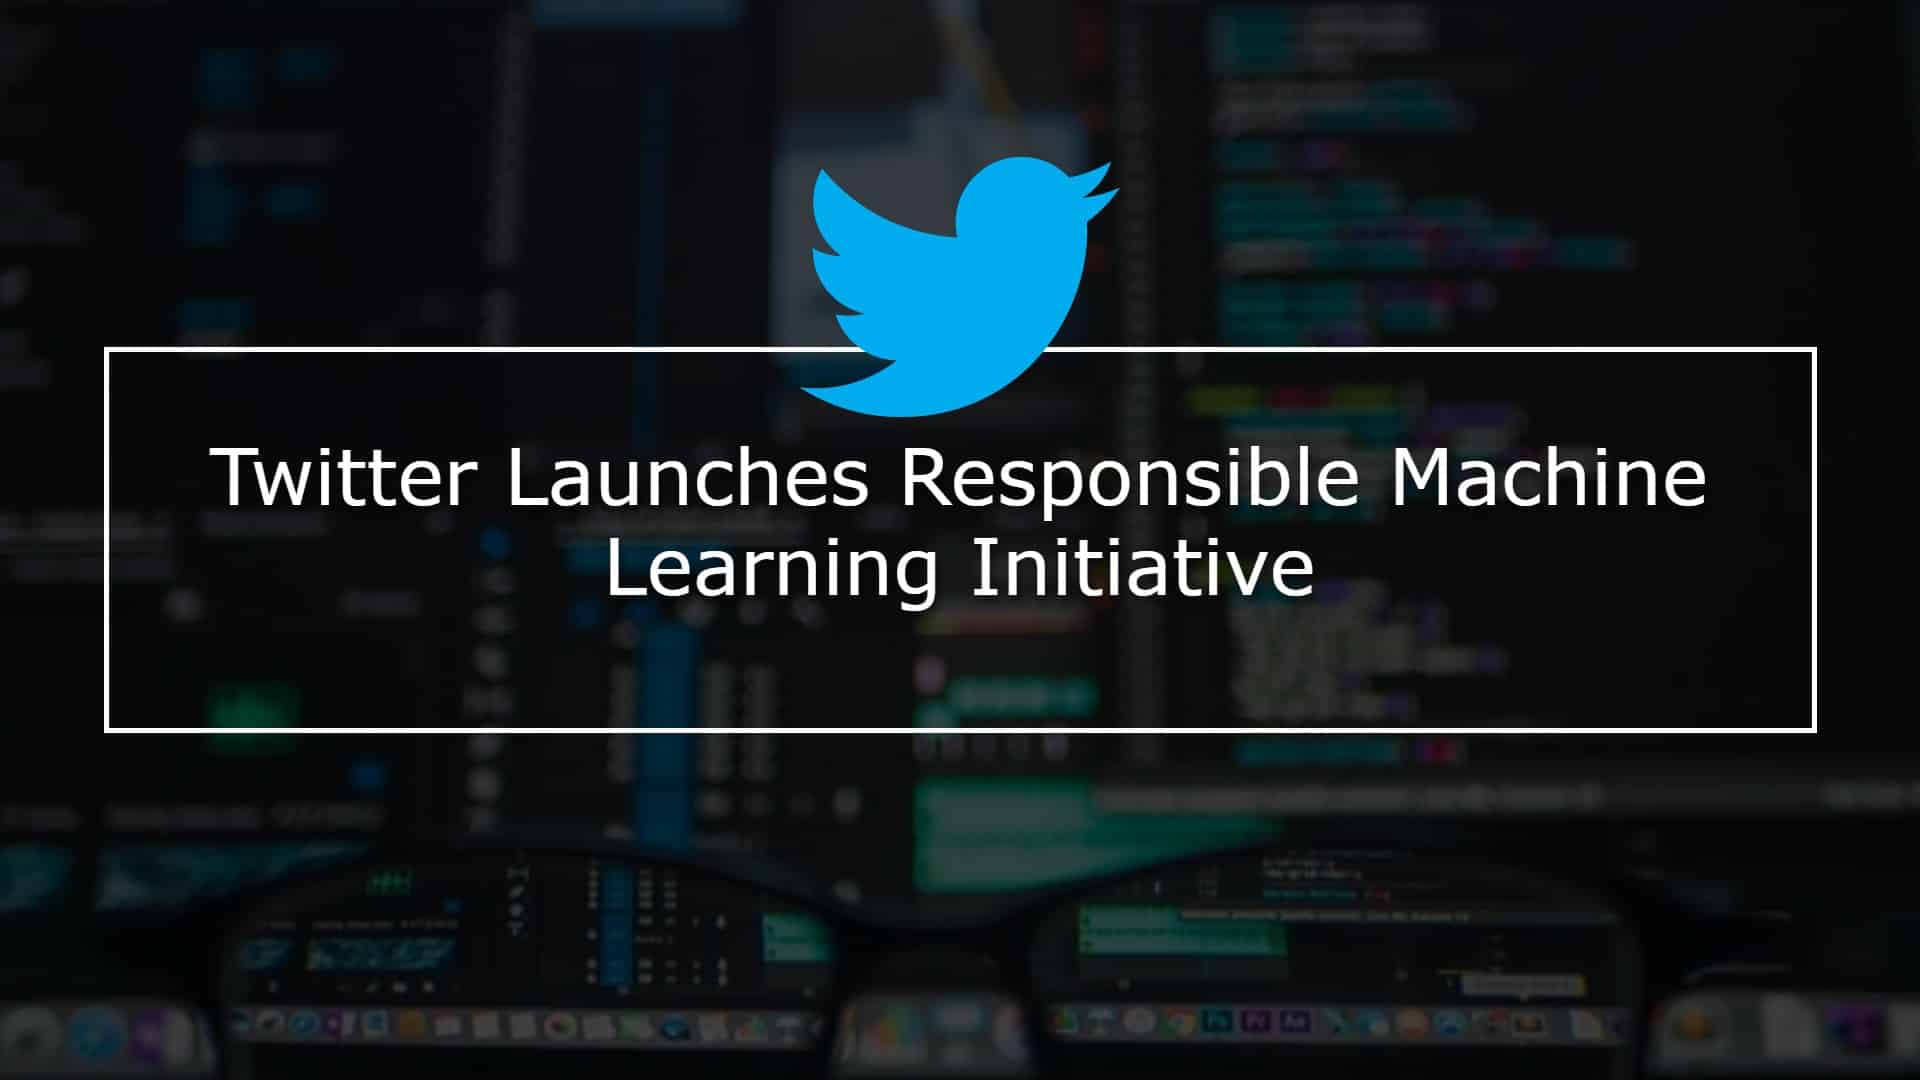 Twitter Launches Responsible Machine Learning Initiative